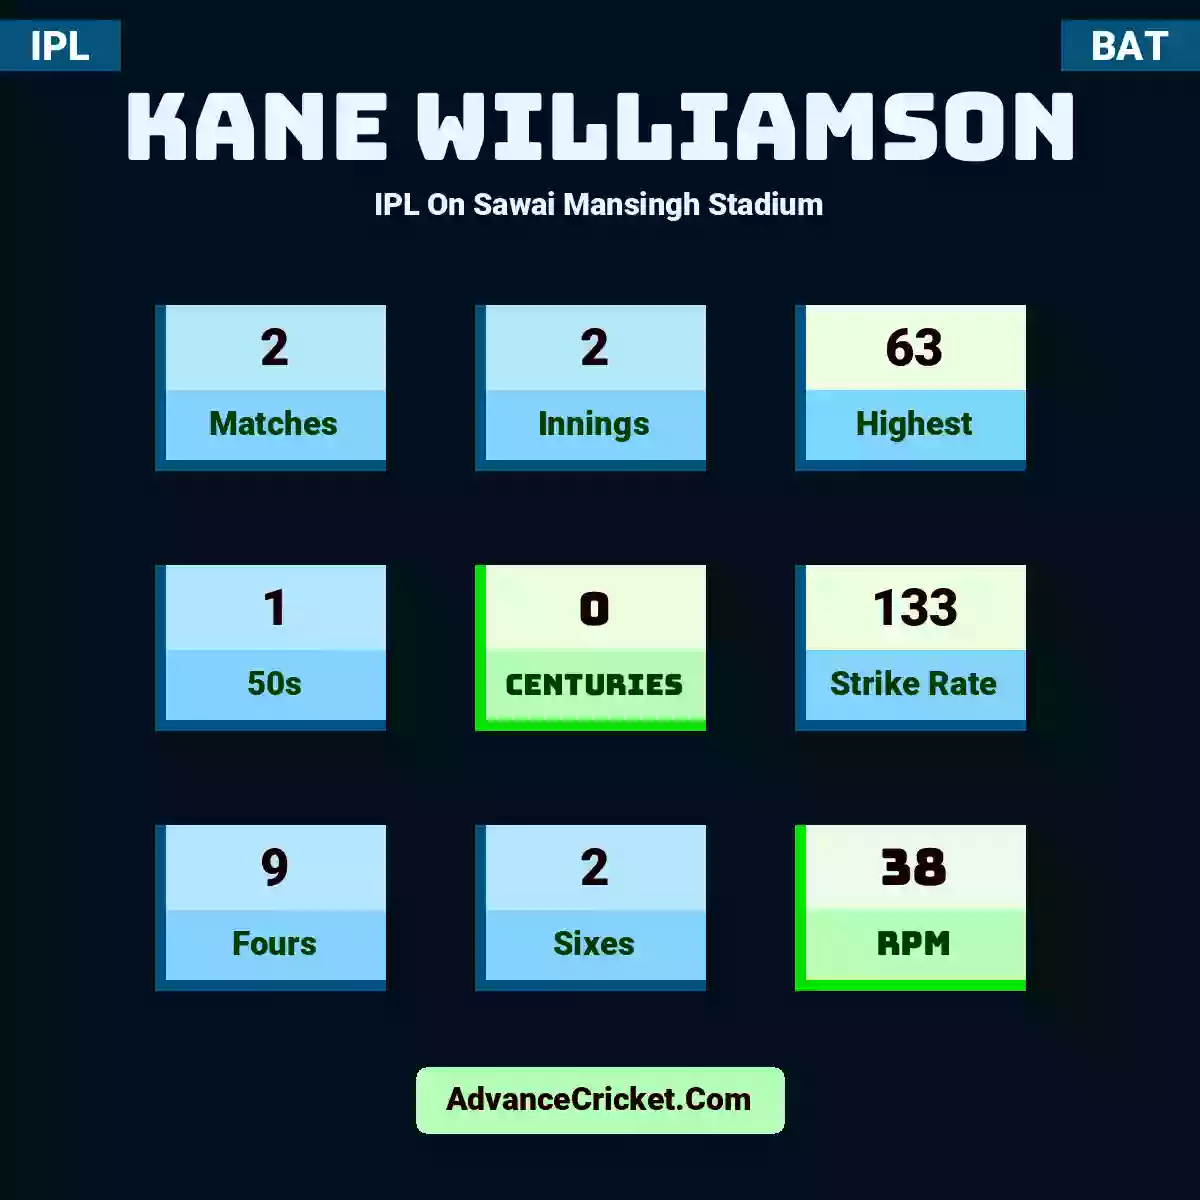 Kane Williamson IPL  On Sawai Mansingh Stadium, Kane Williamson played 2 matches, scored 63 runs as highest, 1 half-centuries, and 0 centuries, with a strike rate of 133. K.Williamson hit 9 fours and 2 sixes, with an RPM of 38.